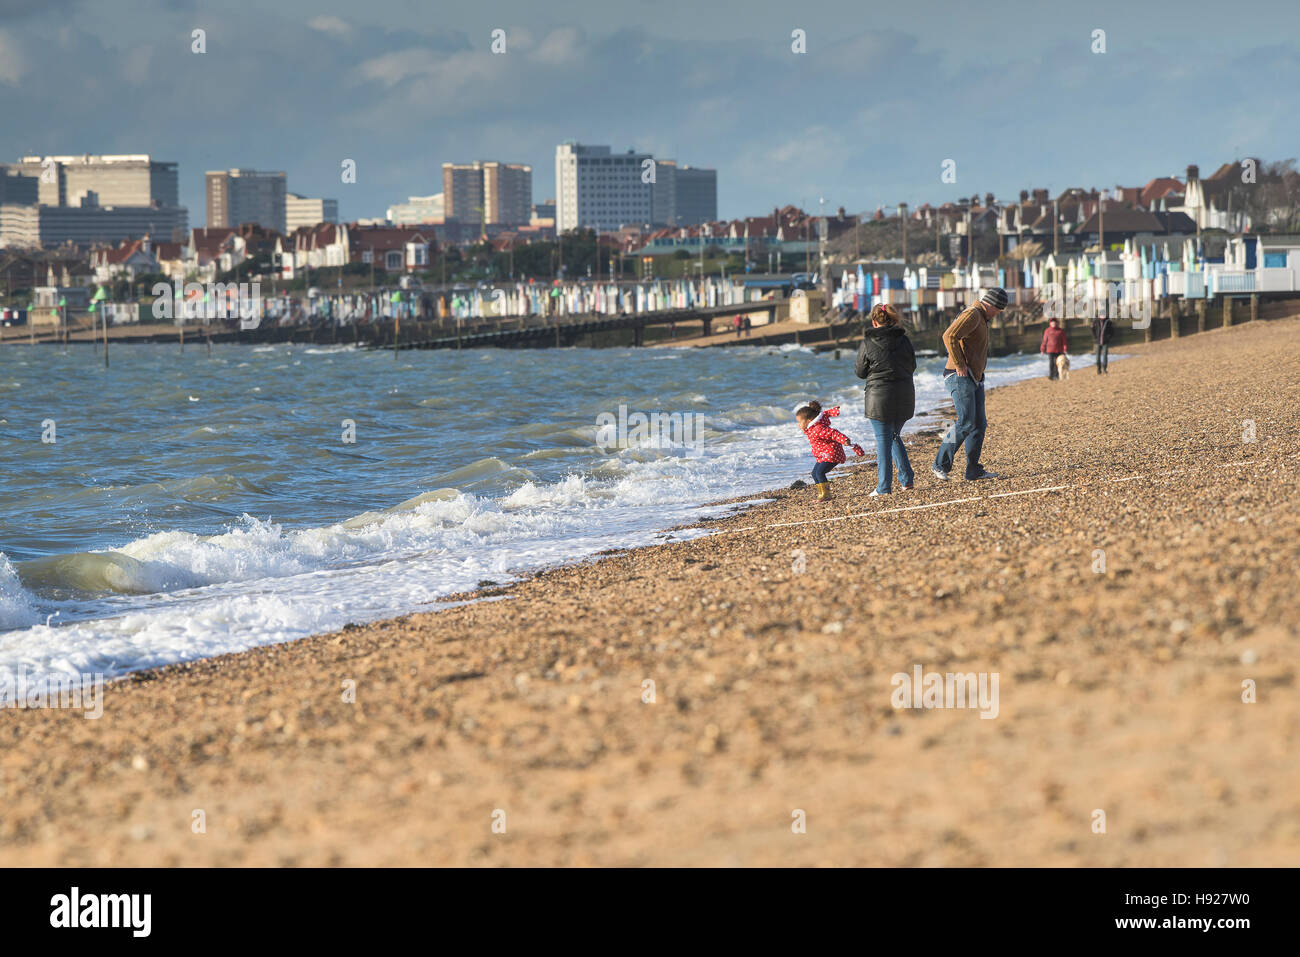 A family enjoying themselves on the beach at Thorpe Bay in Southend on Sea in Essex. Stock Photo